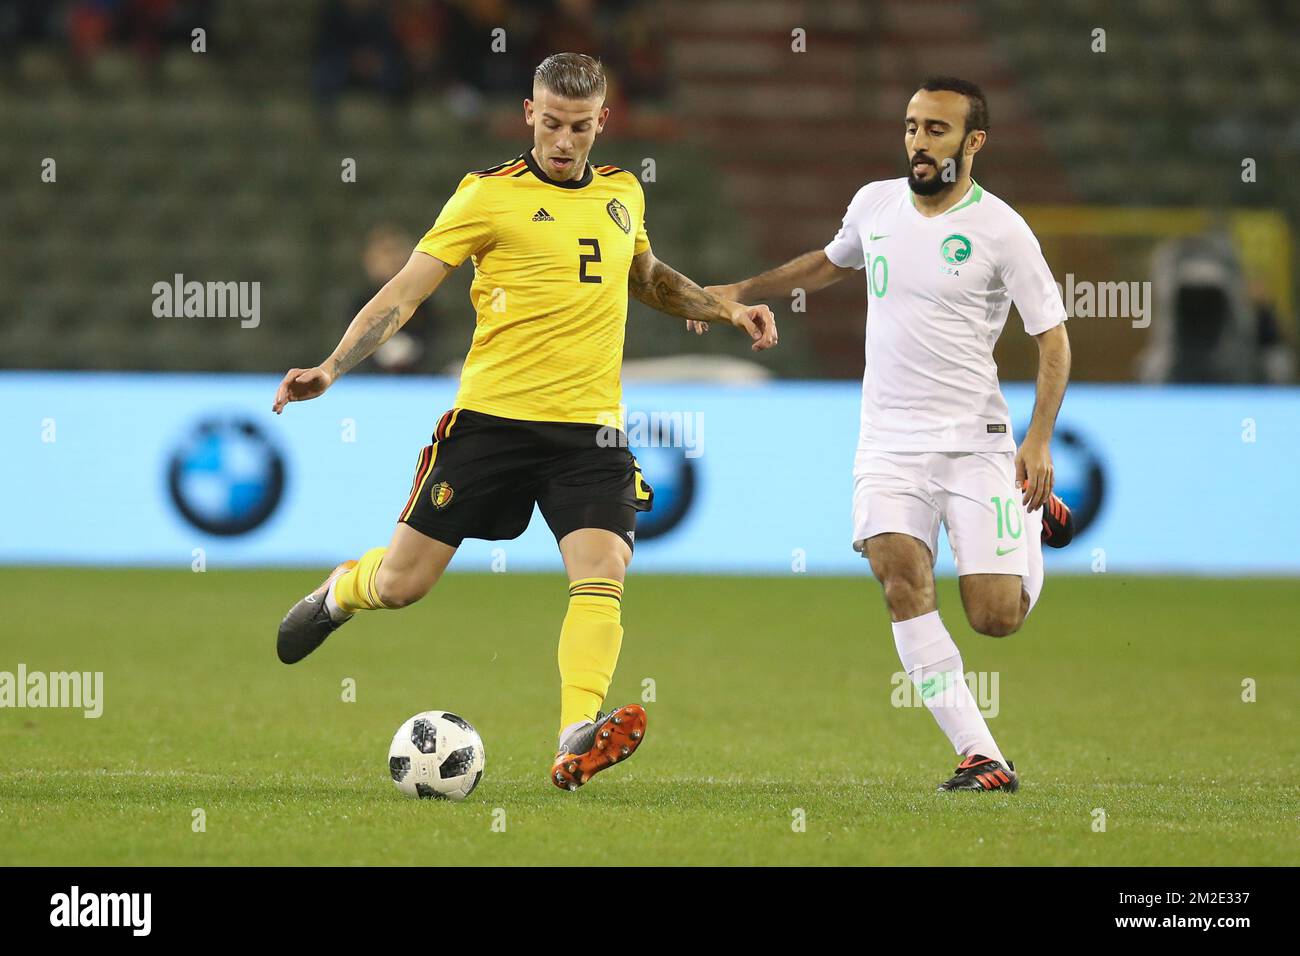 Belgium's Toby Alderweireld and Saudi Arabia's forward Mohammad Al-Sahlawi fight for the ball during a friendly game between the Red Devils Belgian National soccer team and Saudi Arabia, in Brussels, Tuesday 27 March 2018. BELGA PHOTO BRUNO FAHY Stock Photo